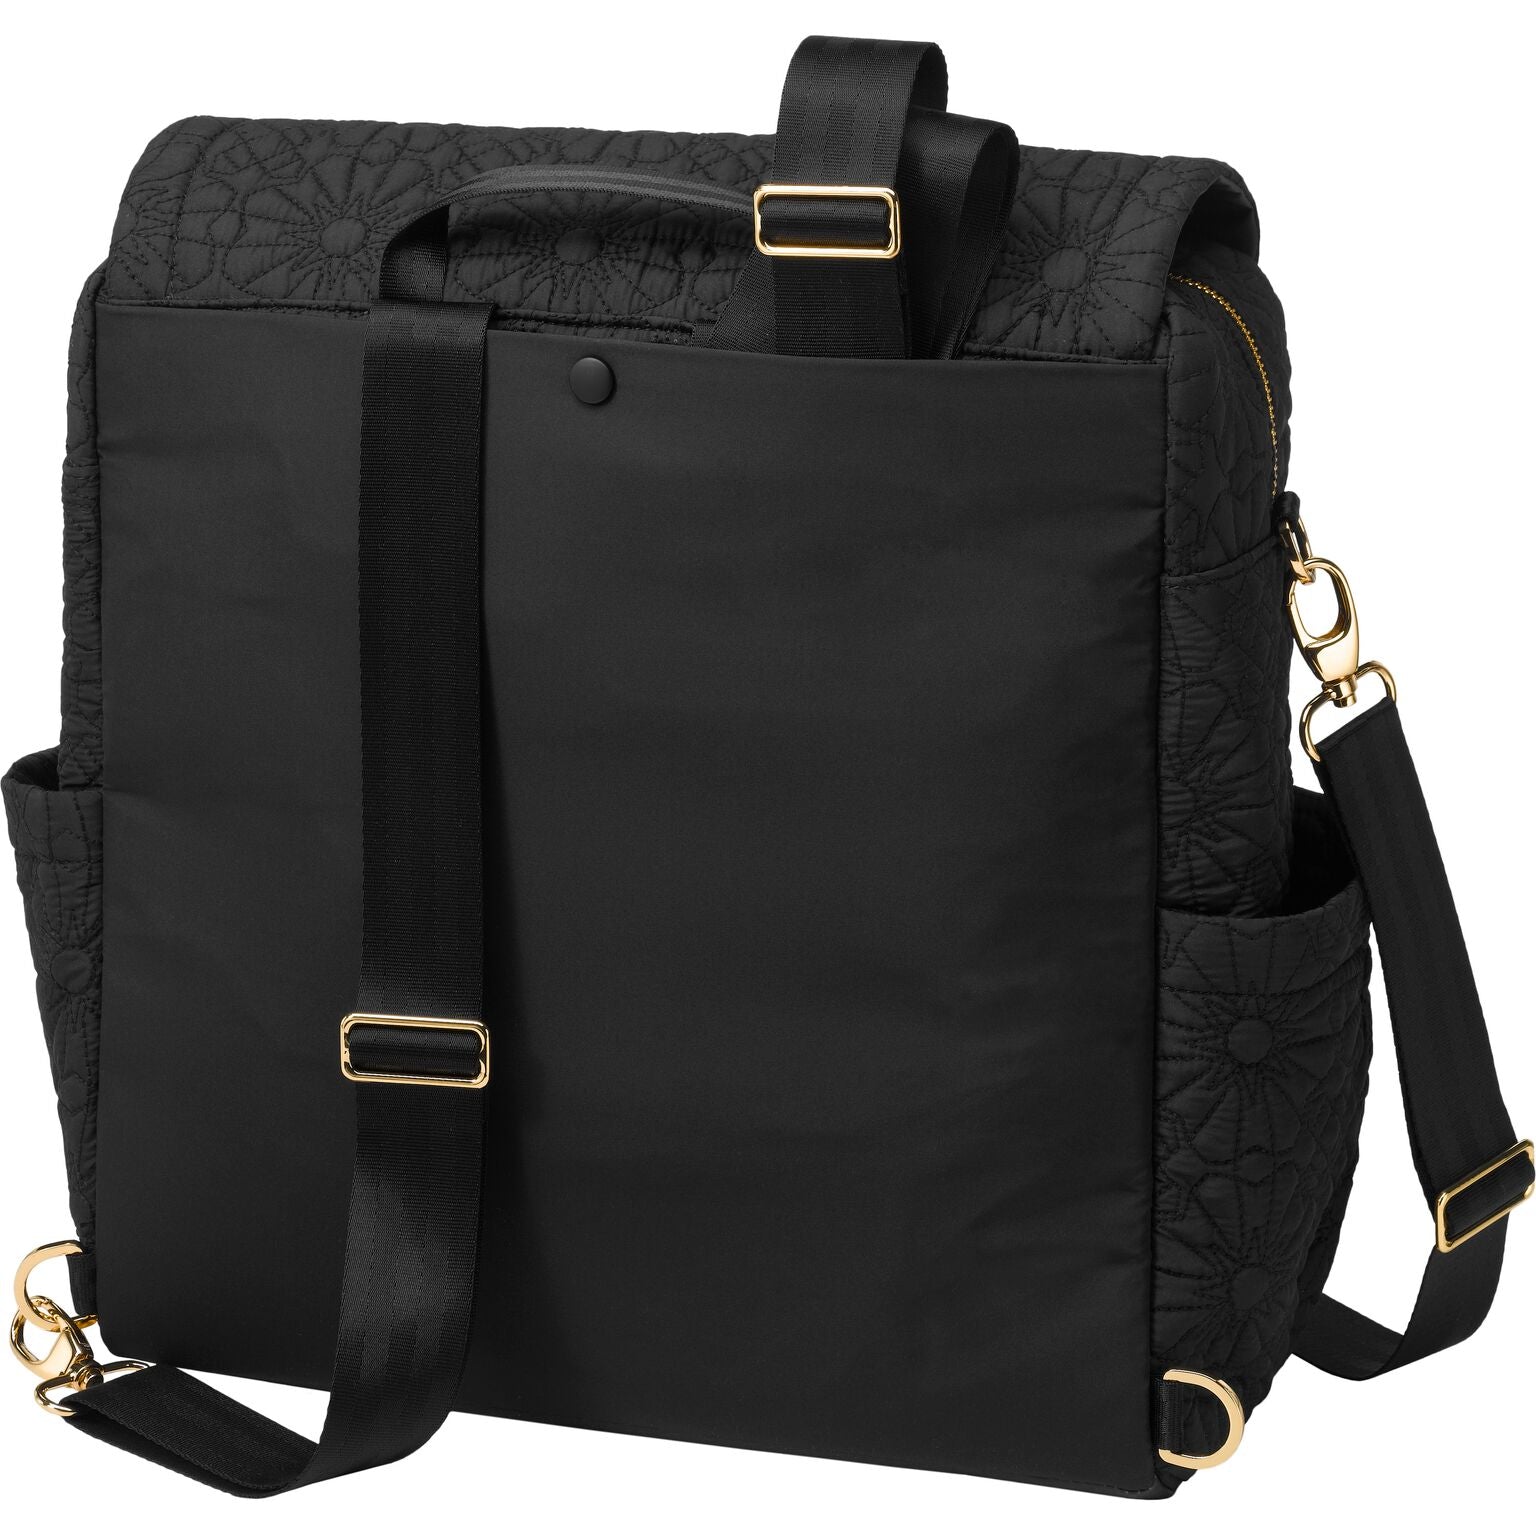 Petunia Pickle Bottom Boxy Backpack - Bedford Ave. Special Edition